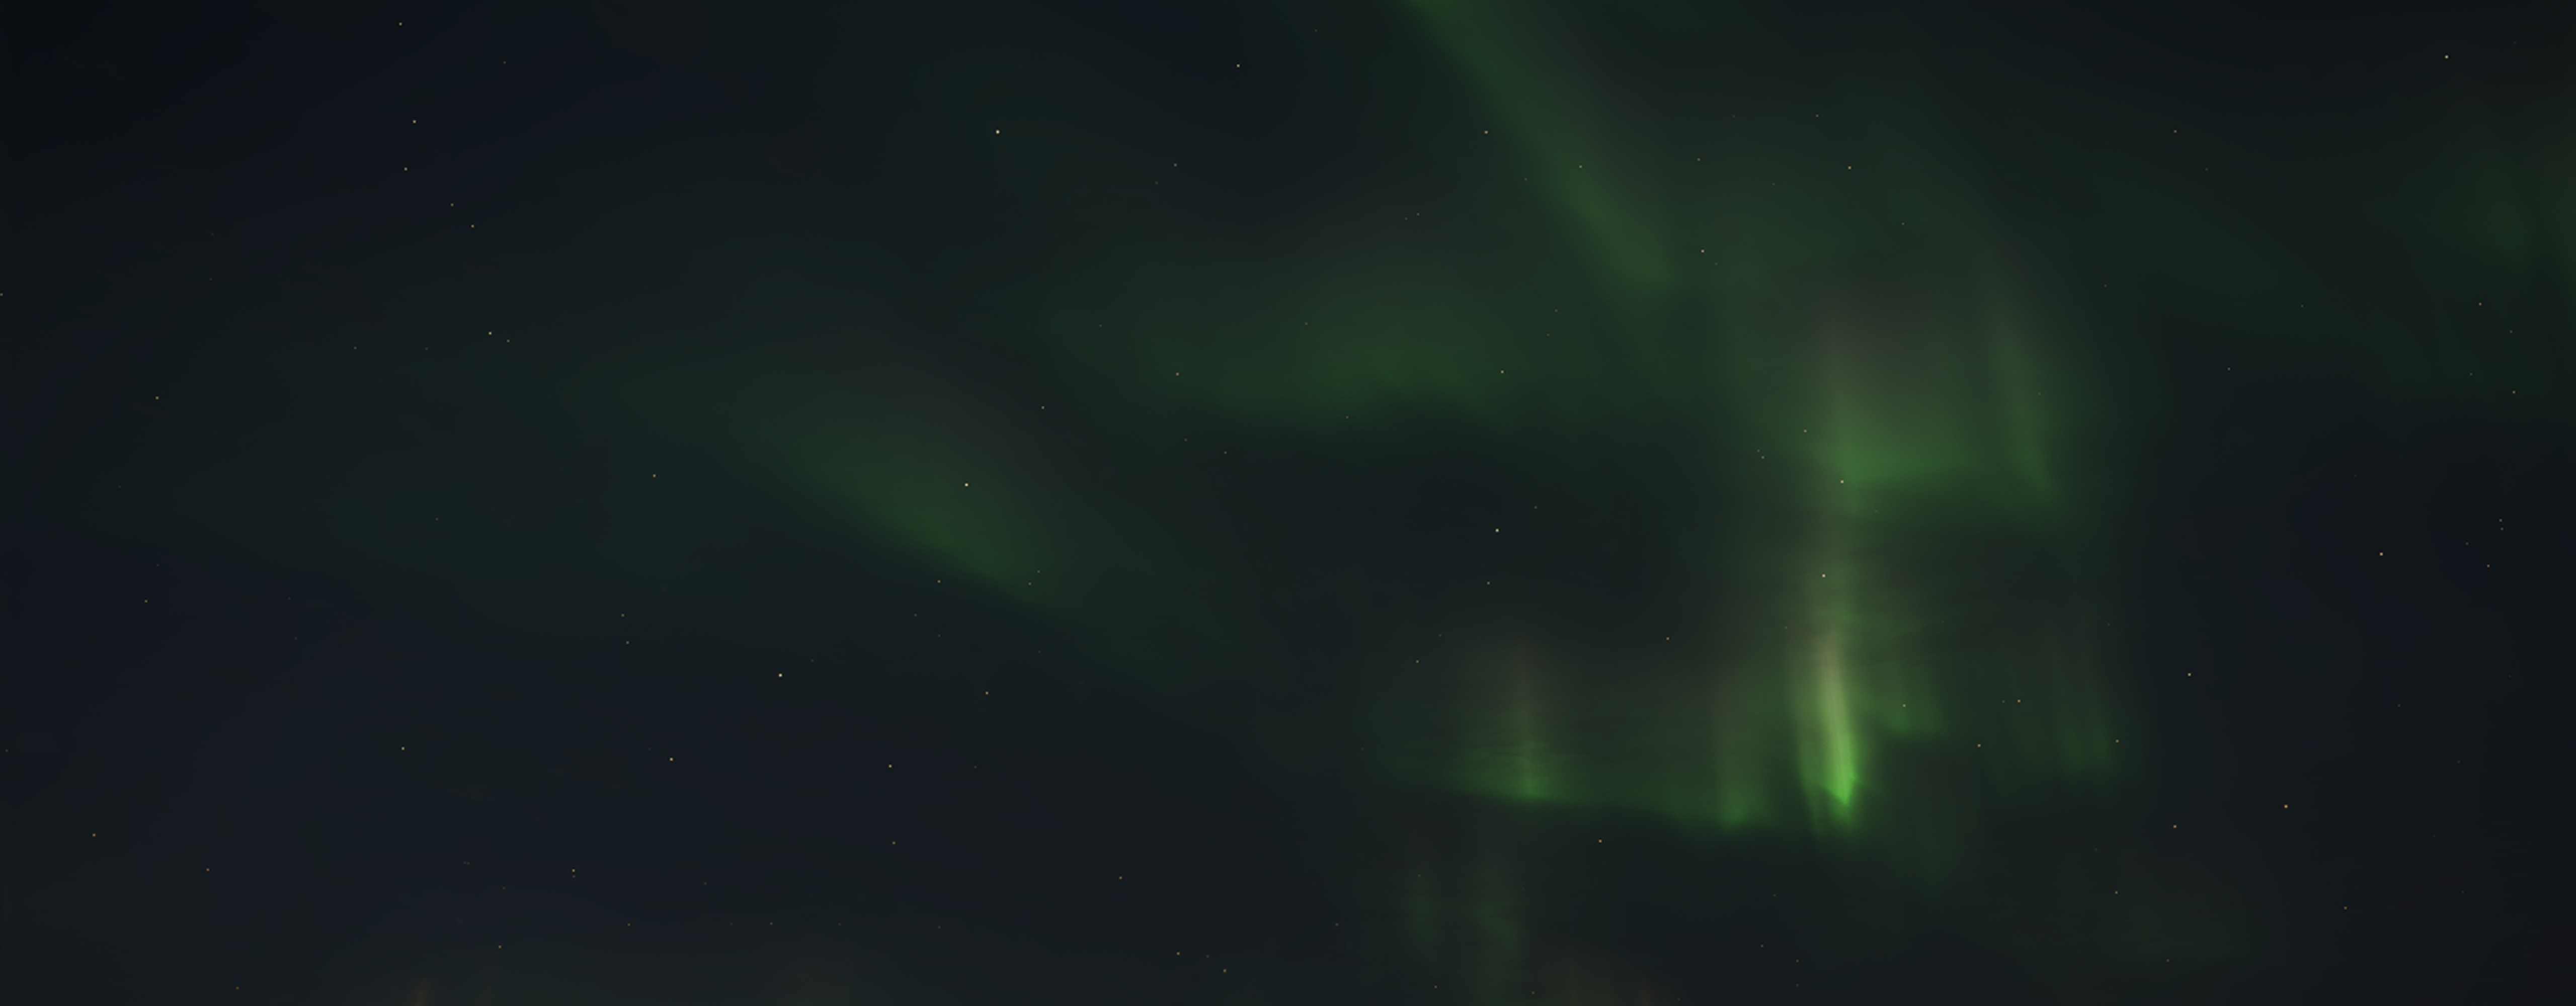 Showcasing the Northern Lights appearing across the starry skies of Revontuli Coast.